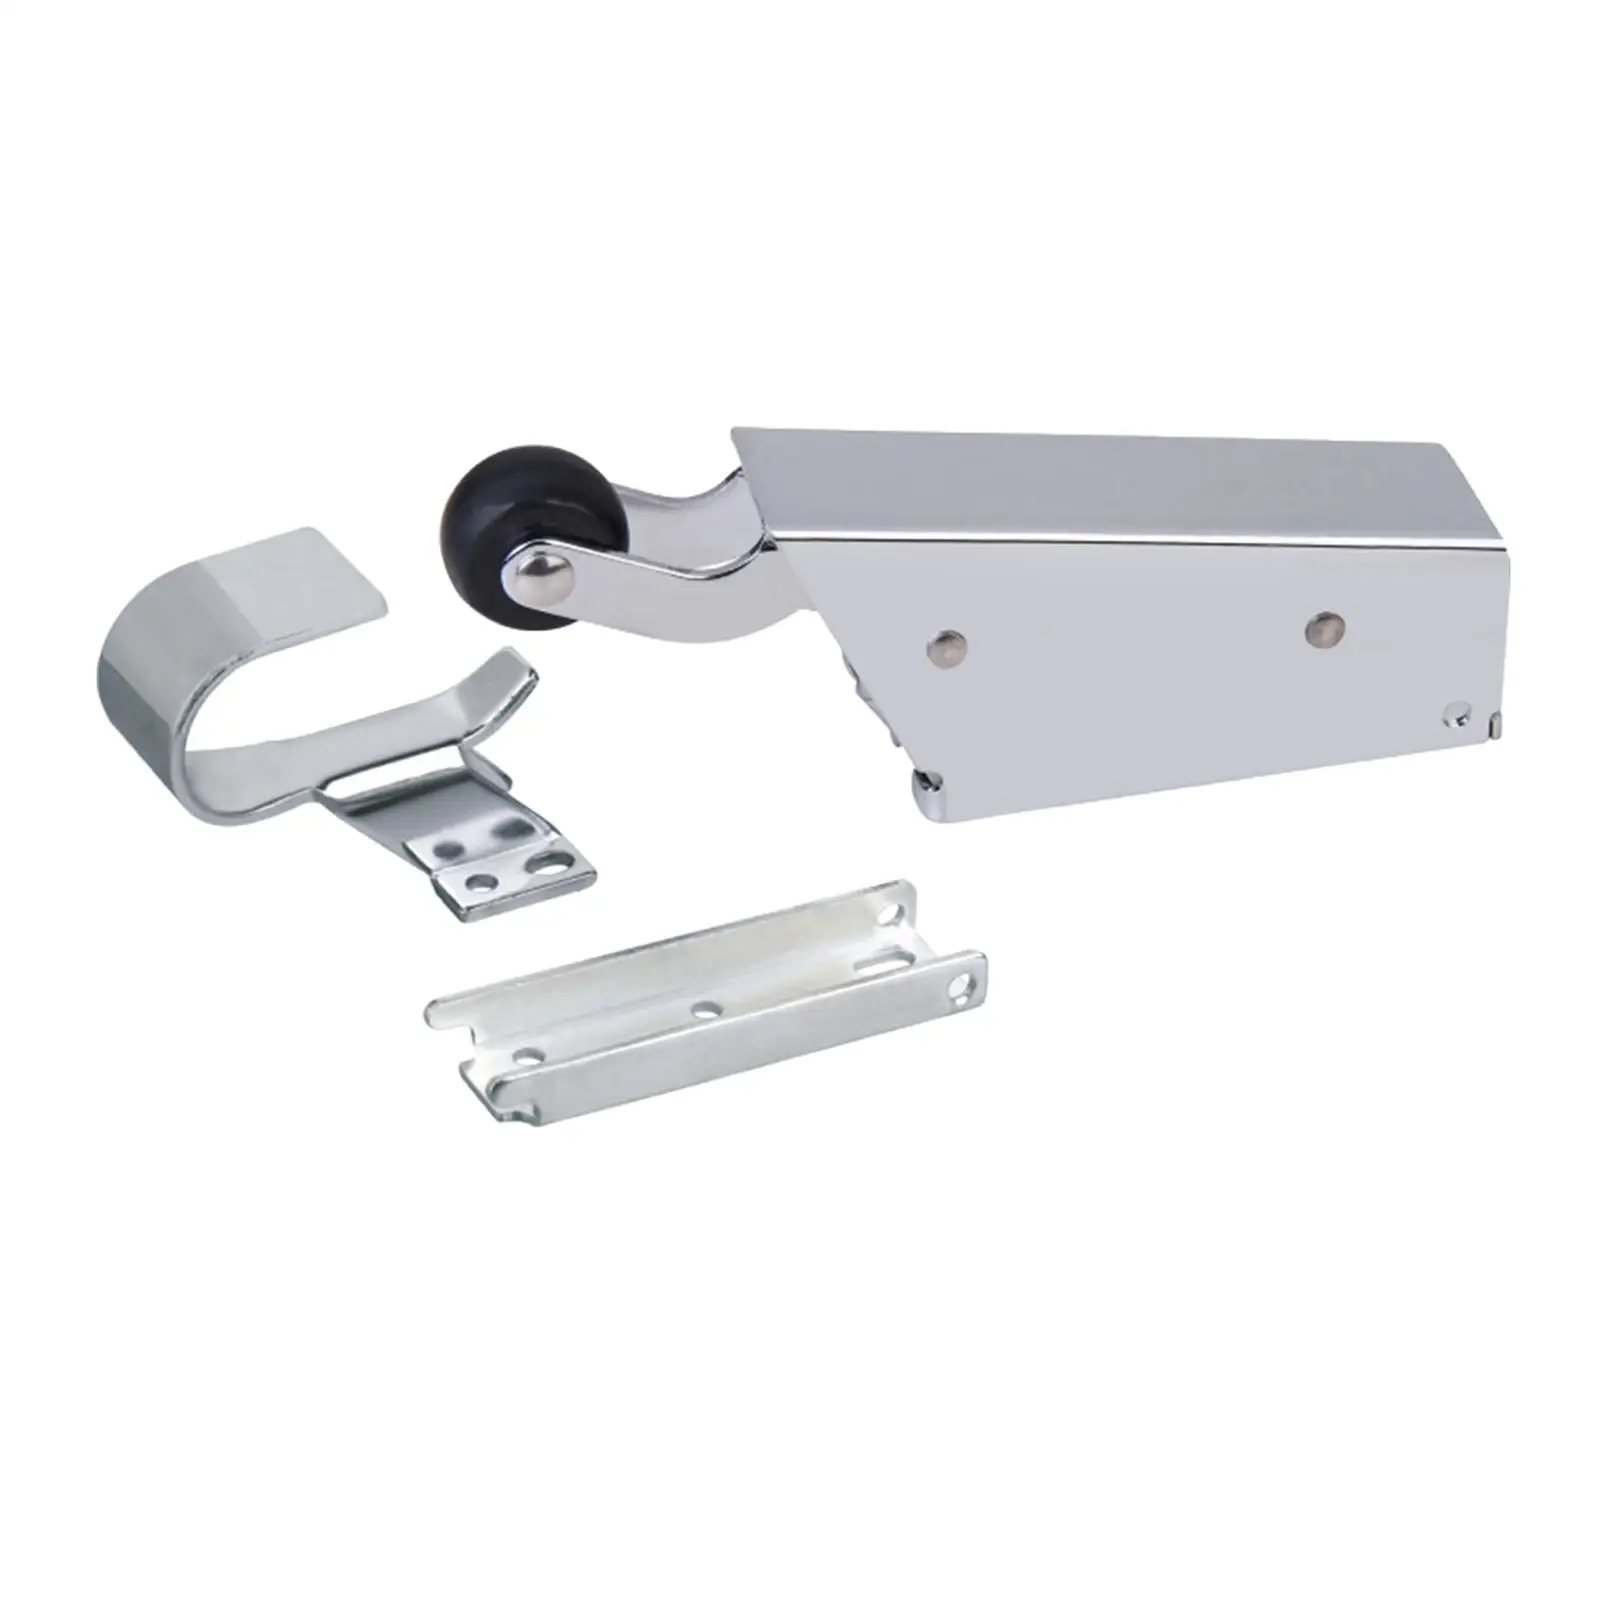 Spring Action Doors Closer Refrigeration Door Closers Automatic School Concealed Mounting Office with Quiet Rubber Wheel